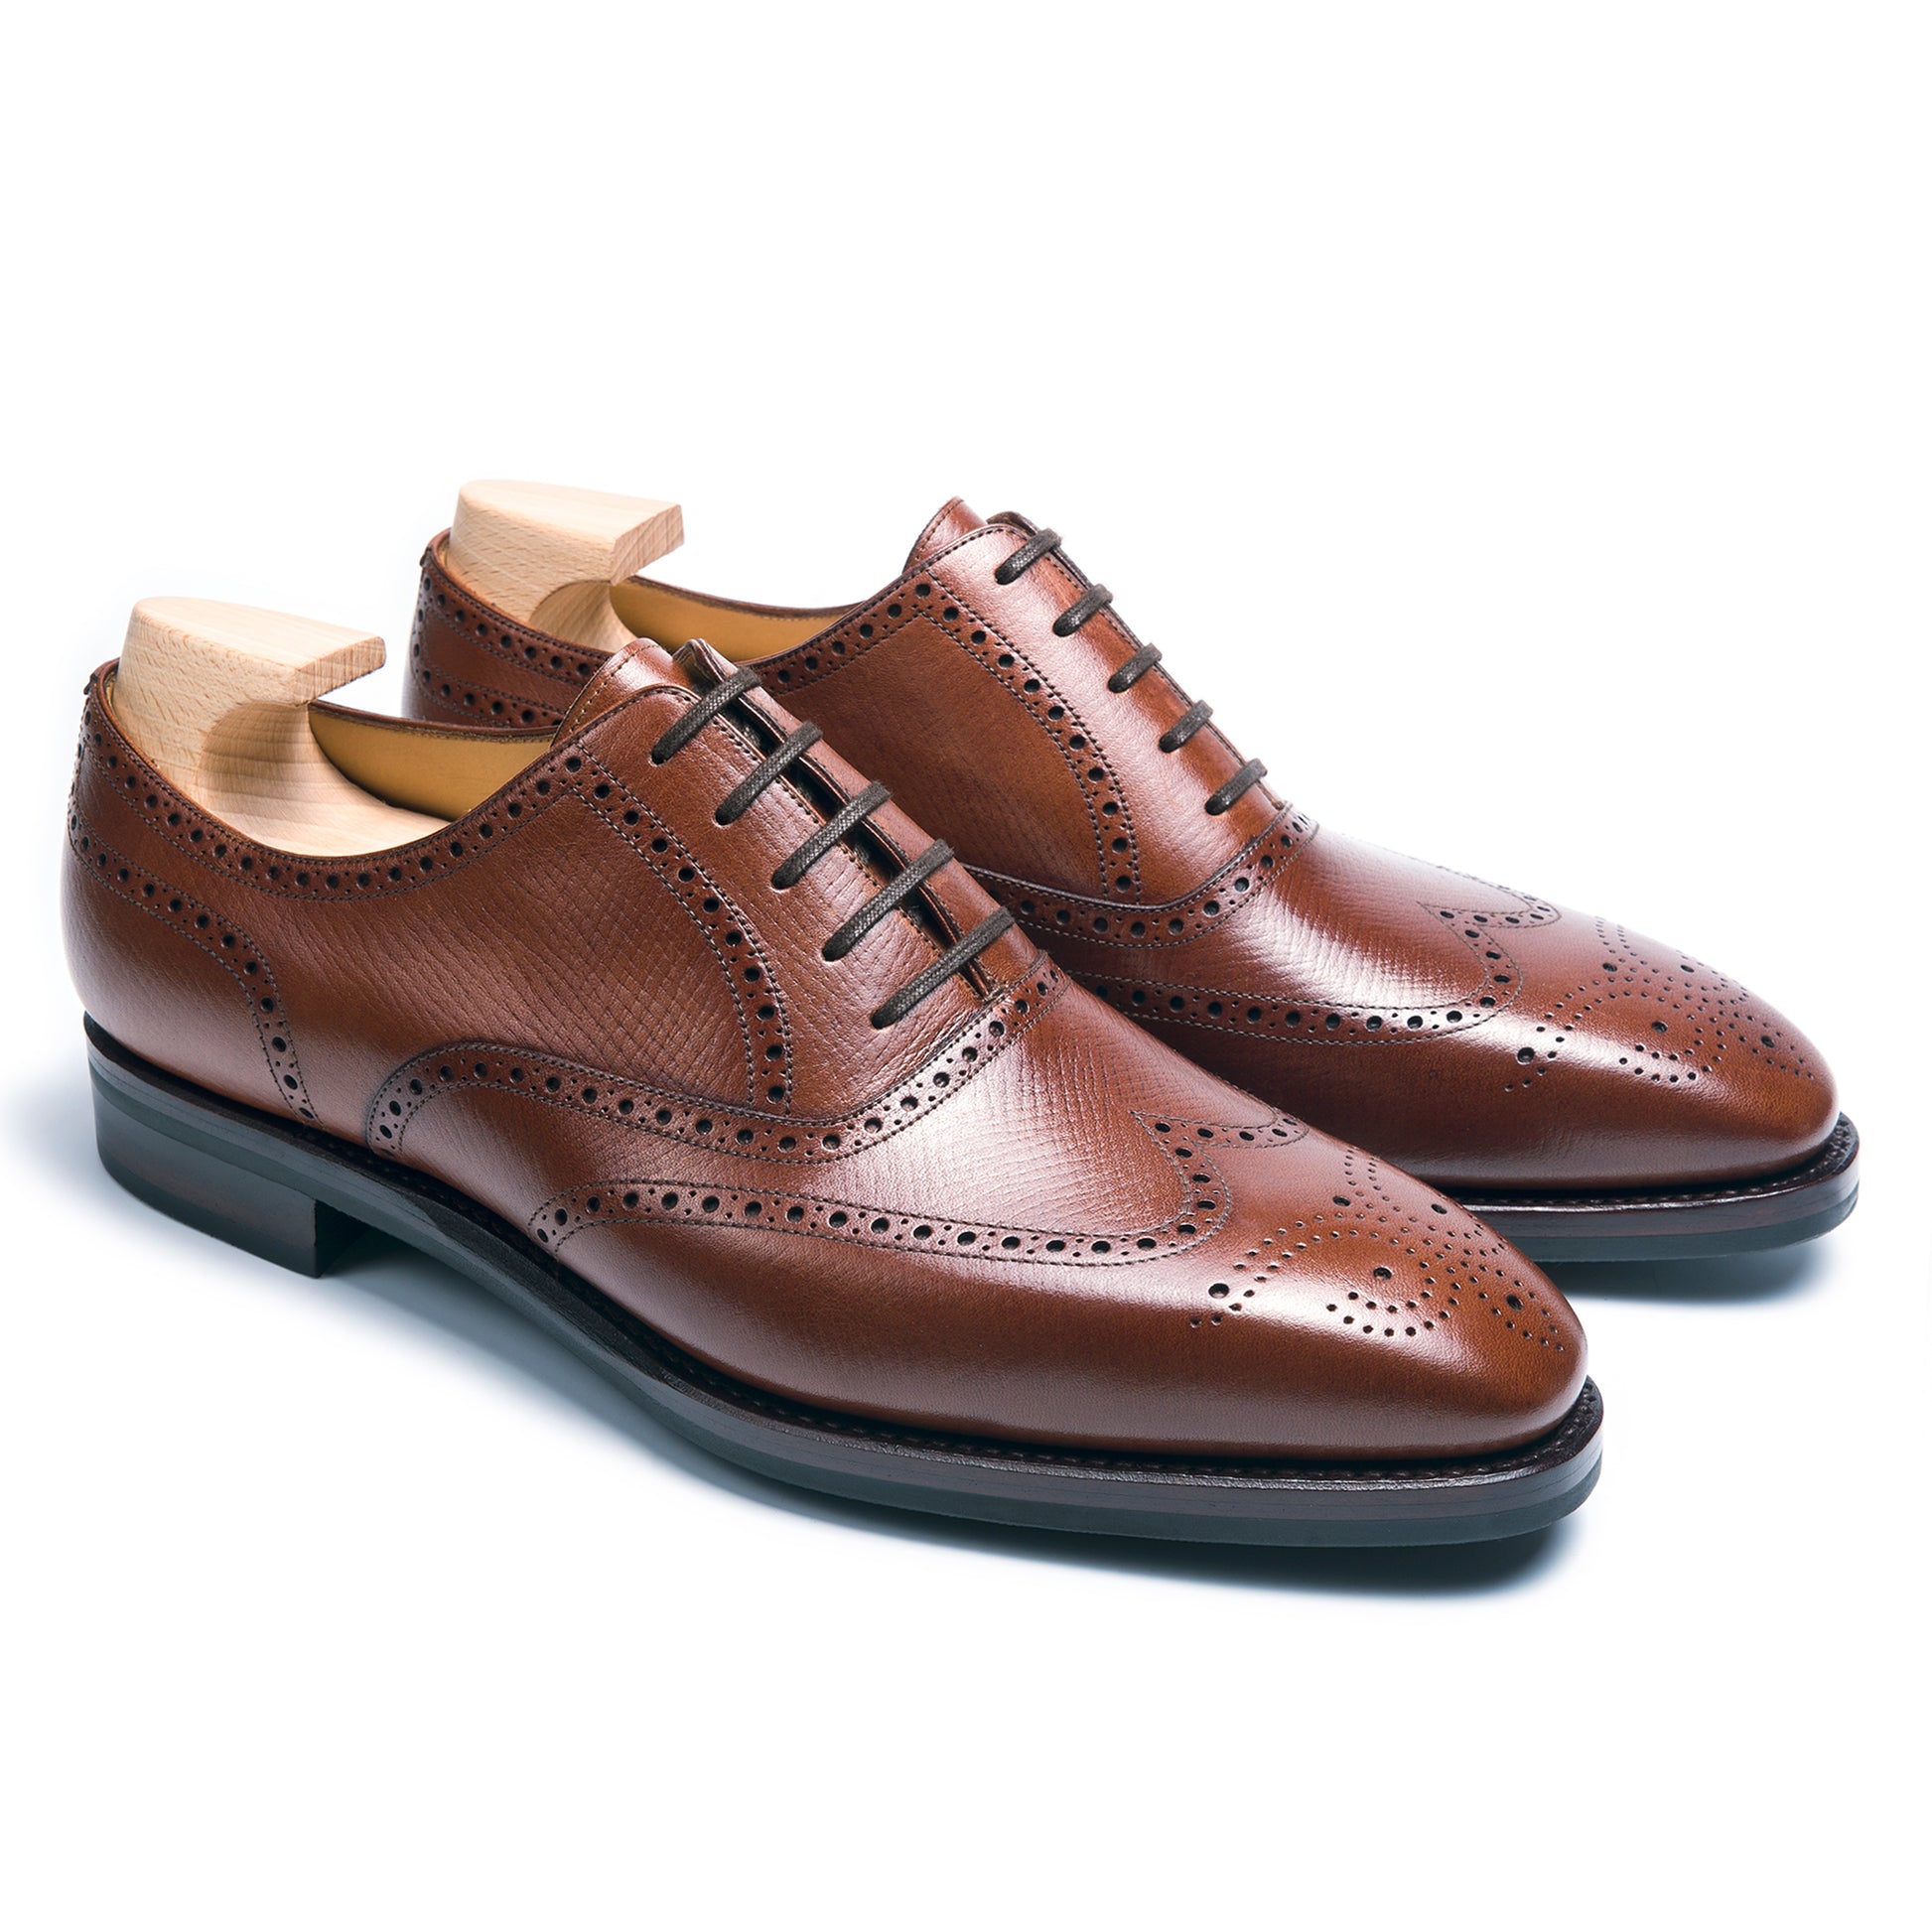 TLB Mallorca leather shoes 110 / PICASSO / HATCH GRAIN TAN